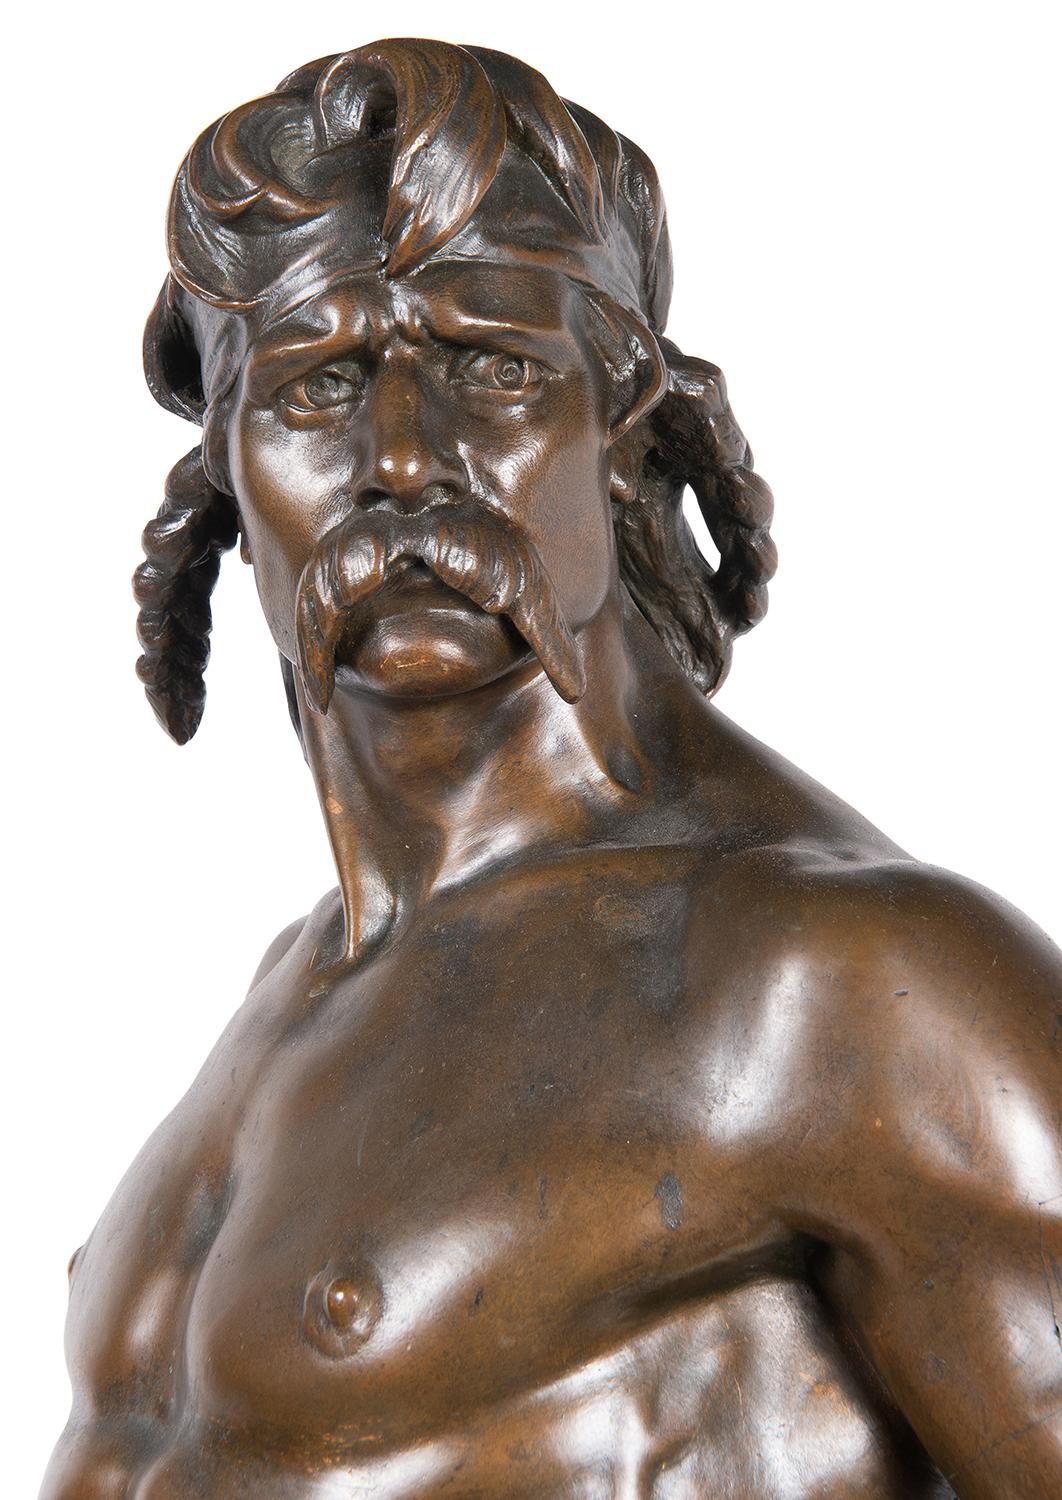 Emile Andre Boisseau (1842-1923, France) bronze sculpture of a man wearing a fur loin cloth, he holds a sword in one hand and leans beside a farmer’s plow; titled on a brass plaque on the front in Latin and French 